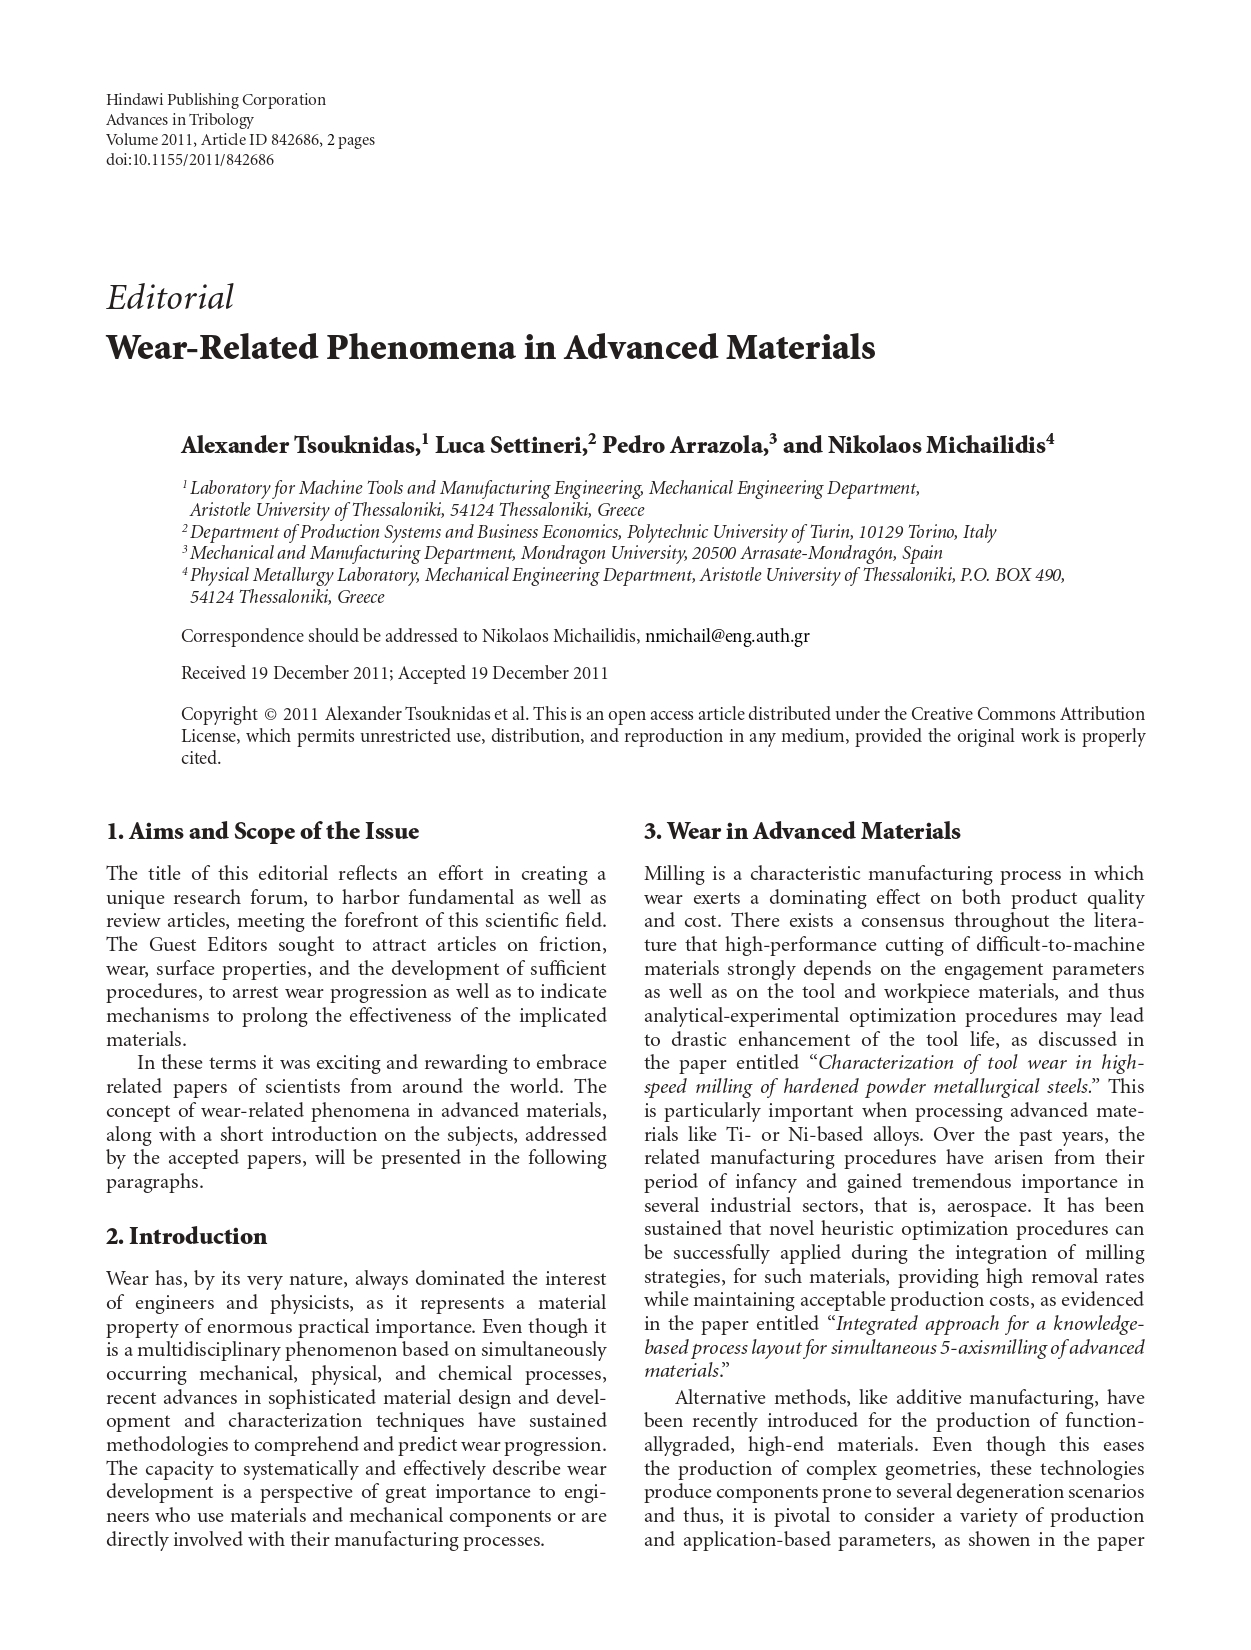 Wear-related phenomena in advanced materials_page-0001.jpg